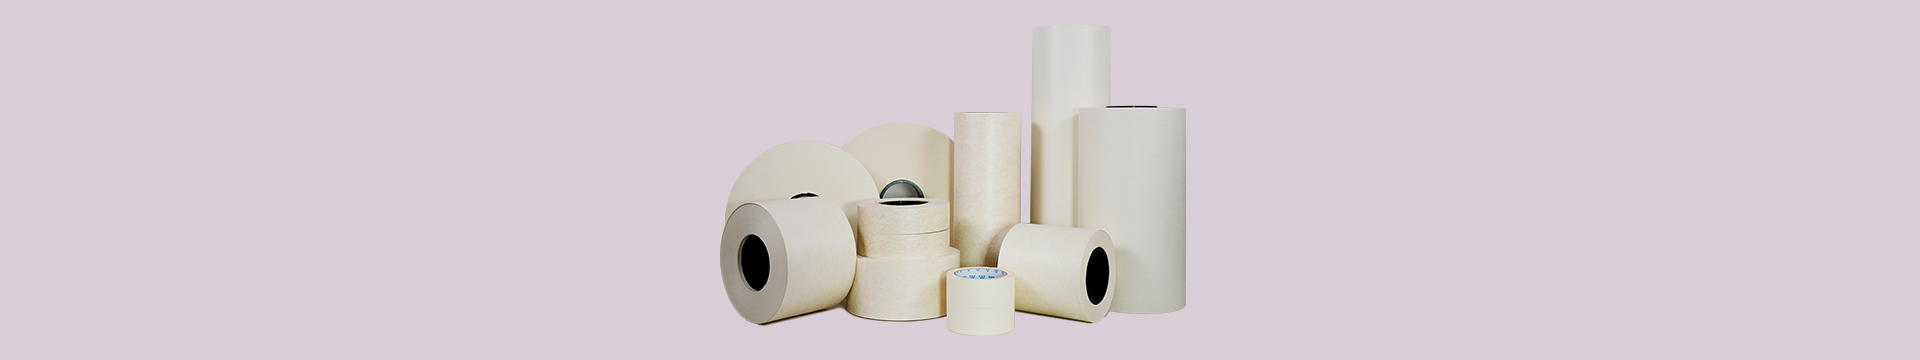 Wholesale aramid paper for industrial use, electrical insulation Aramid paper manufacturer